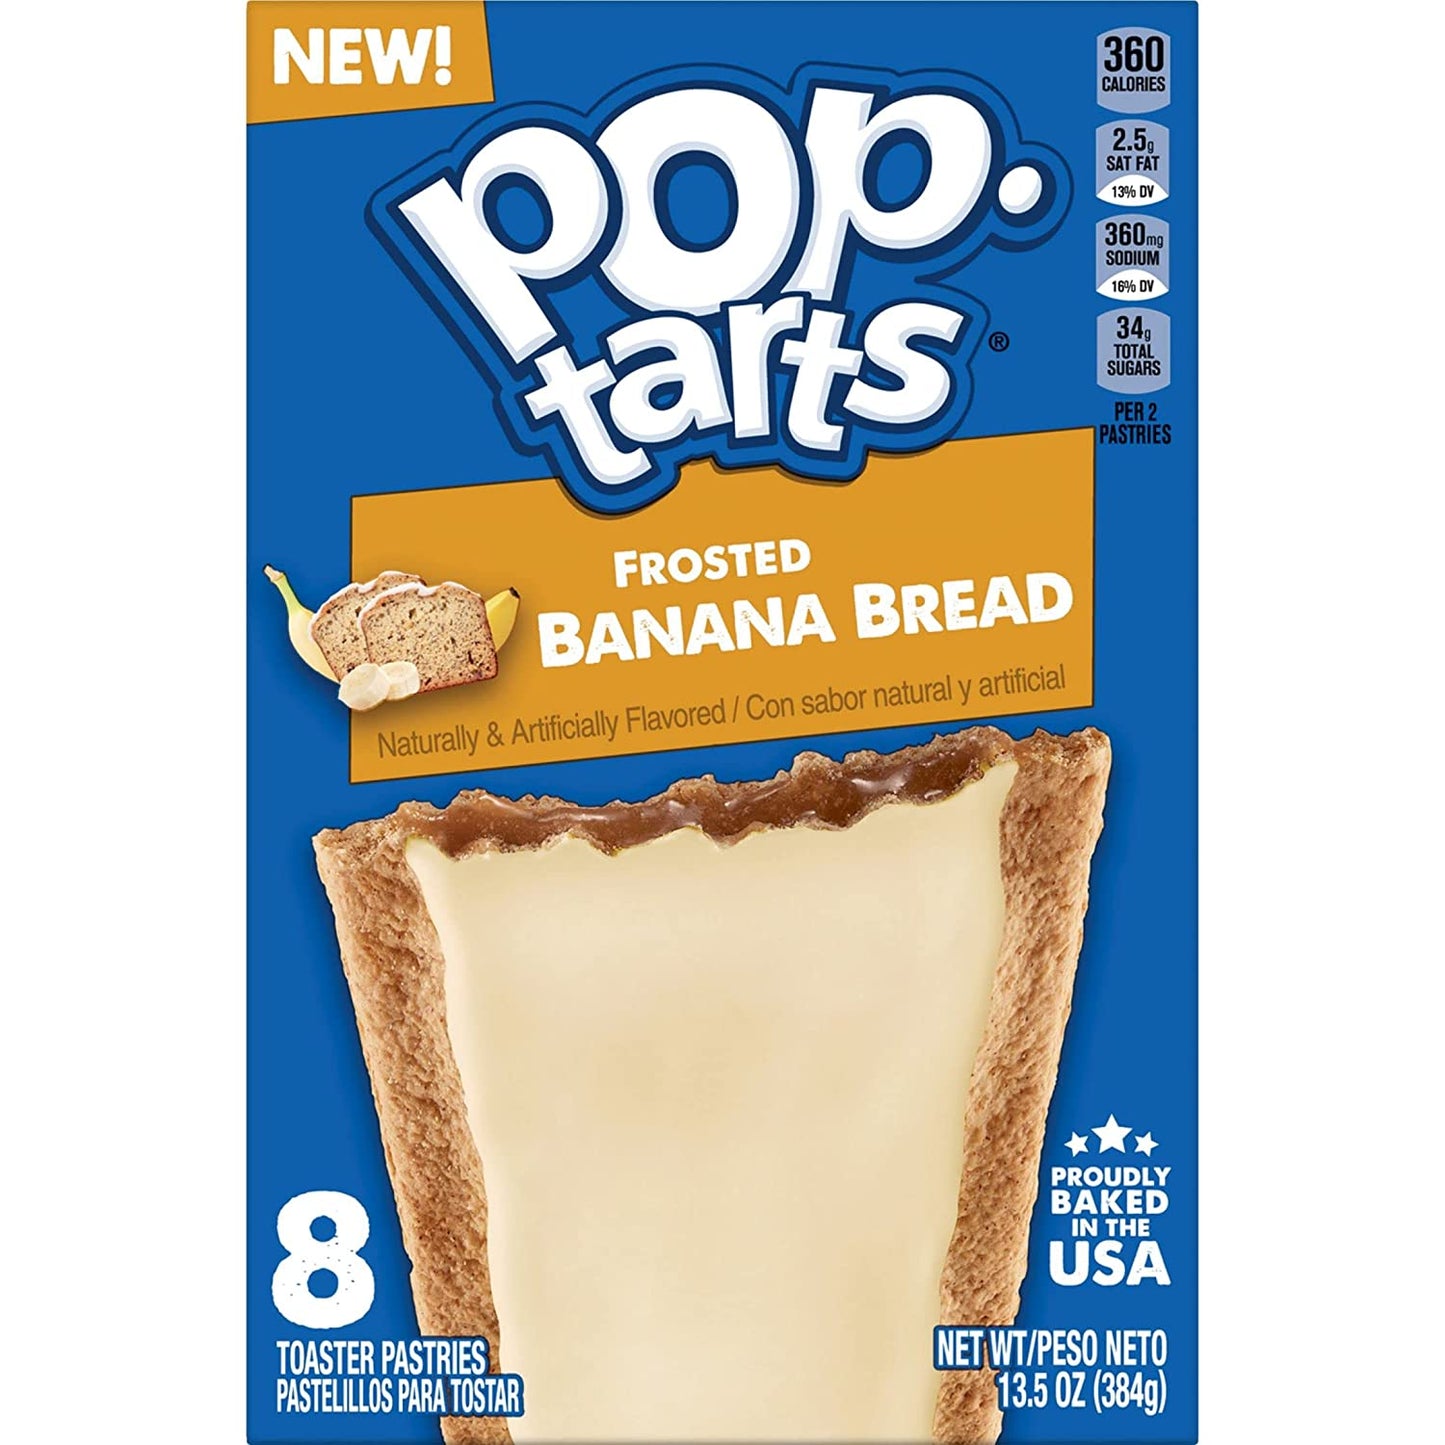 Pop-Tarts Toaster Pastries,  Frosted Banana Bread (96 Pop-Tarts) - Limited Edition